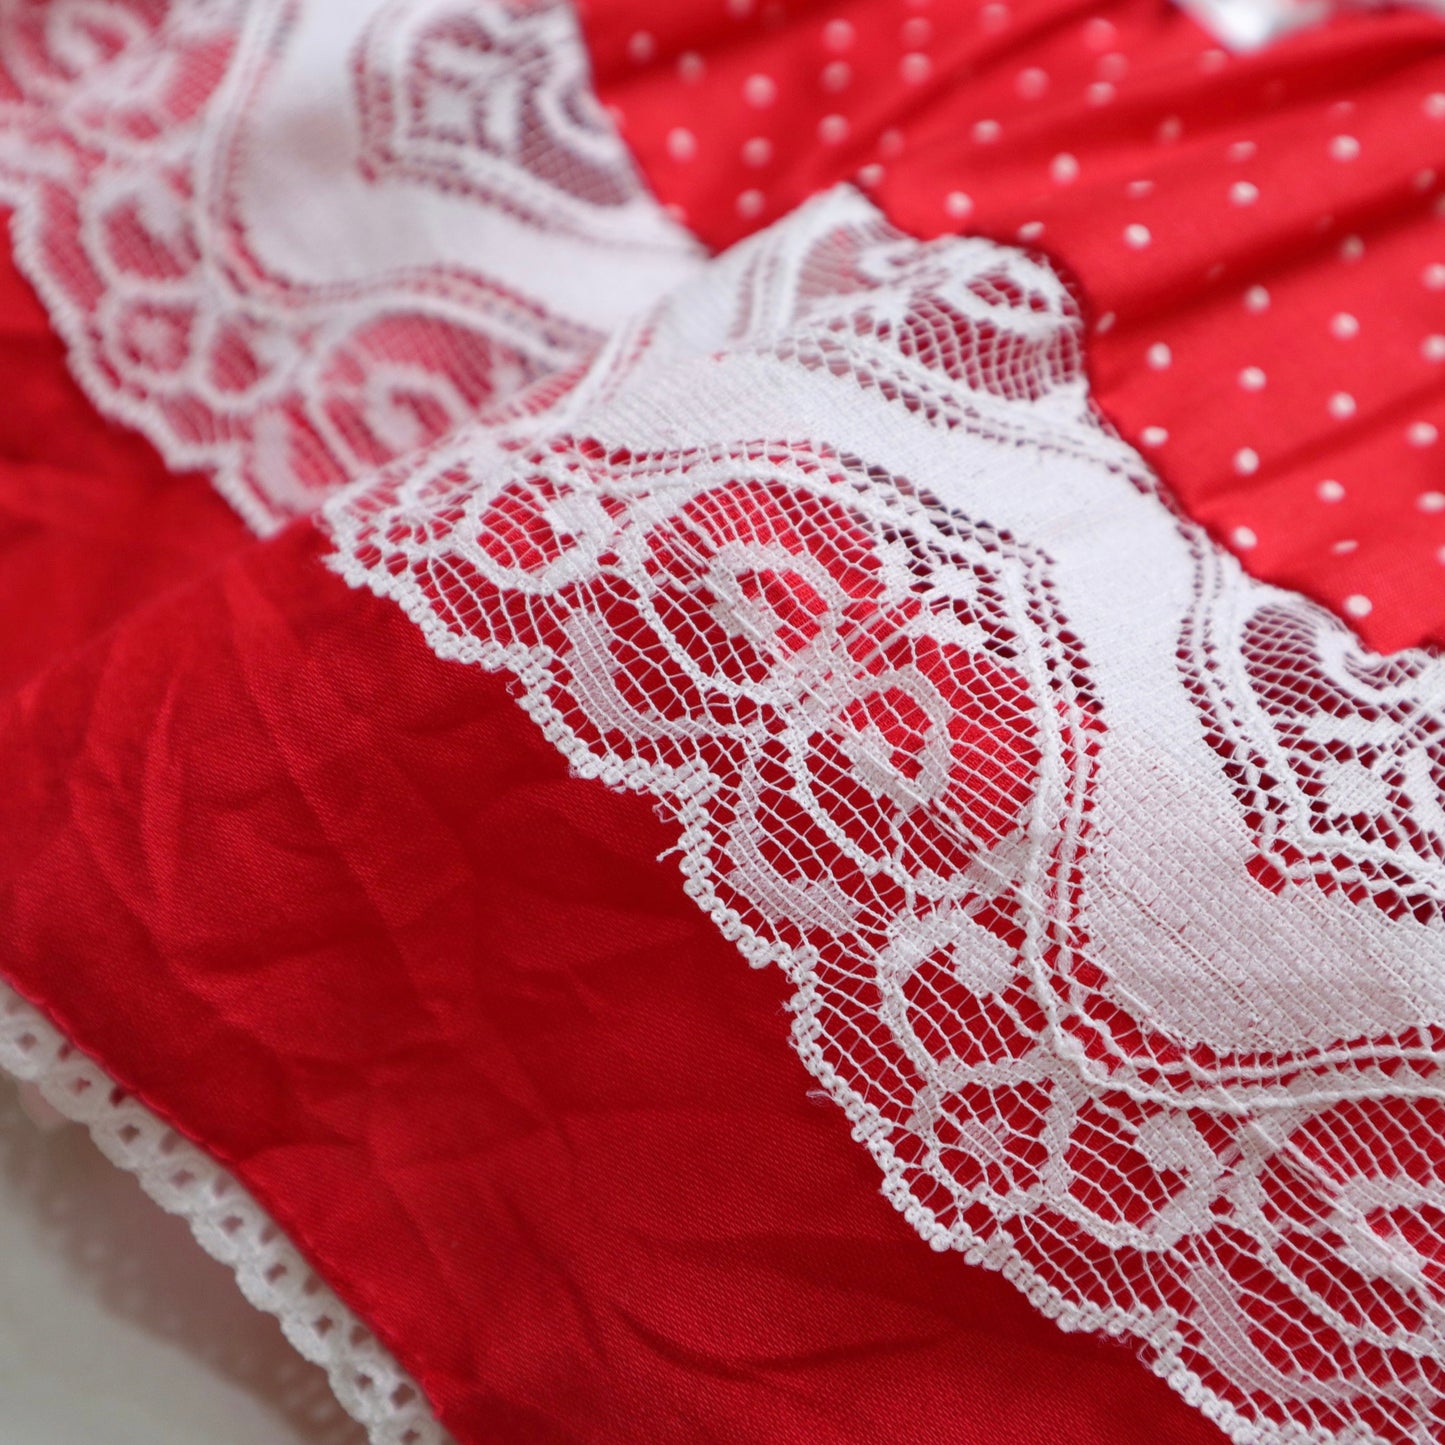 1980s red dotted lace trim skirt